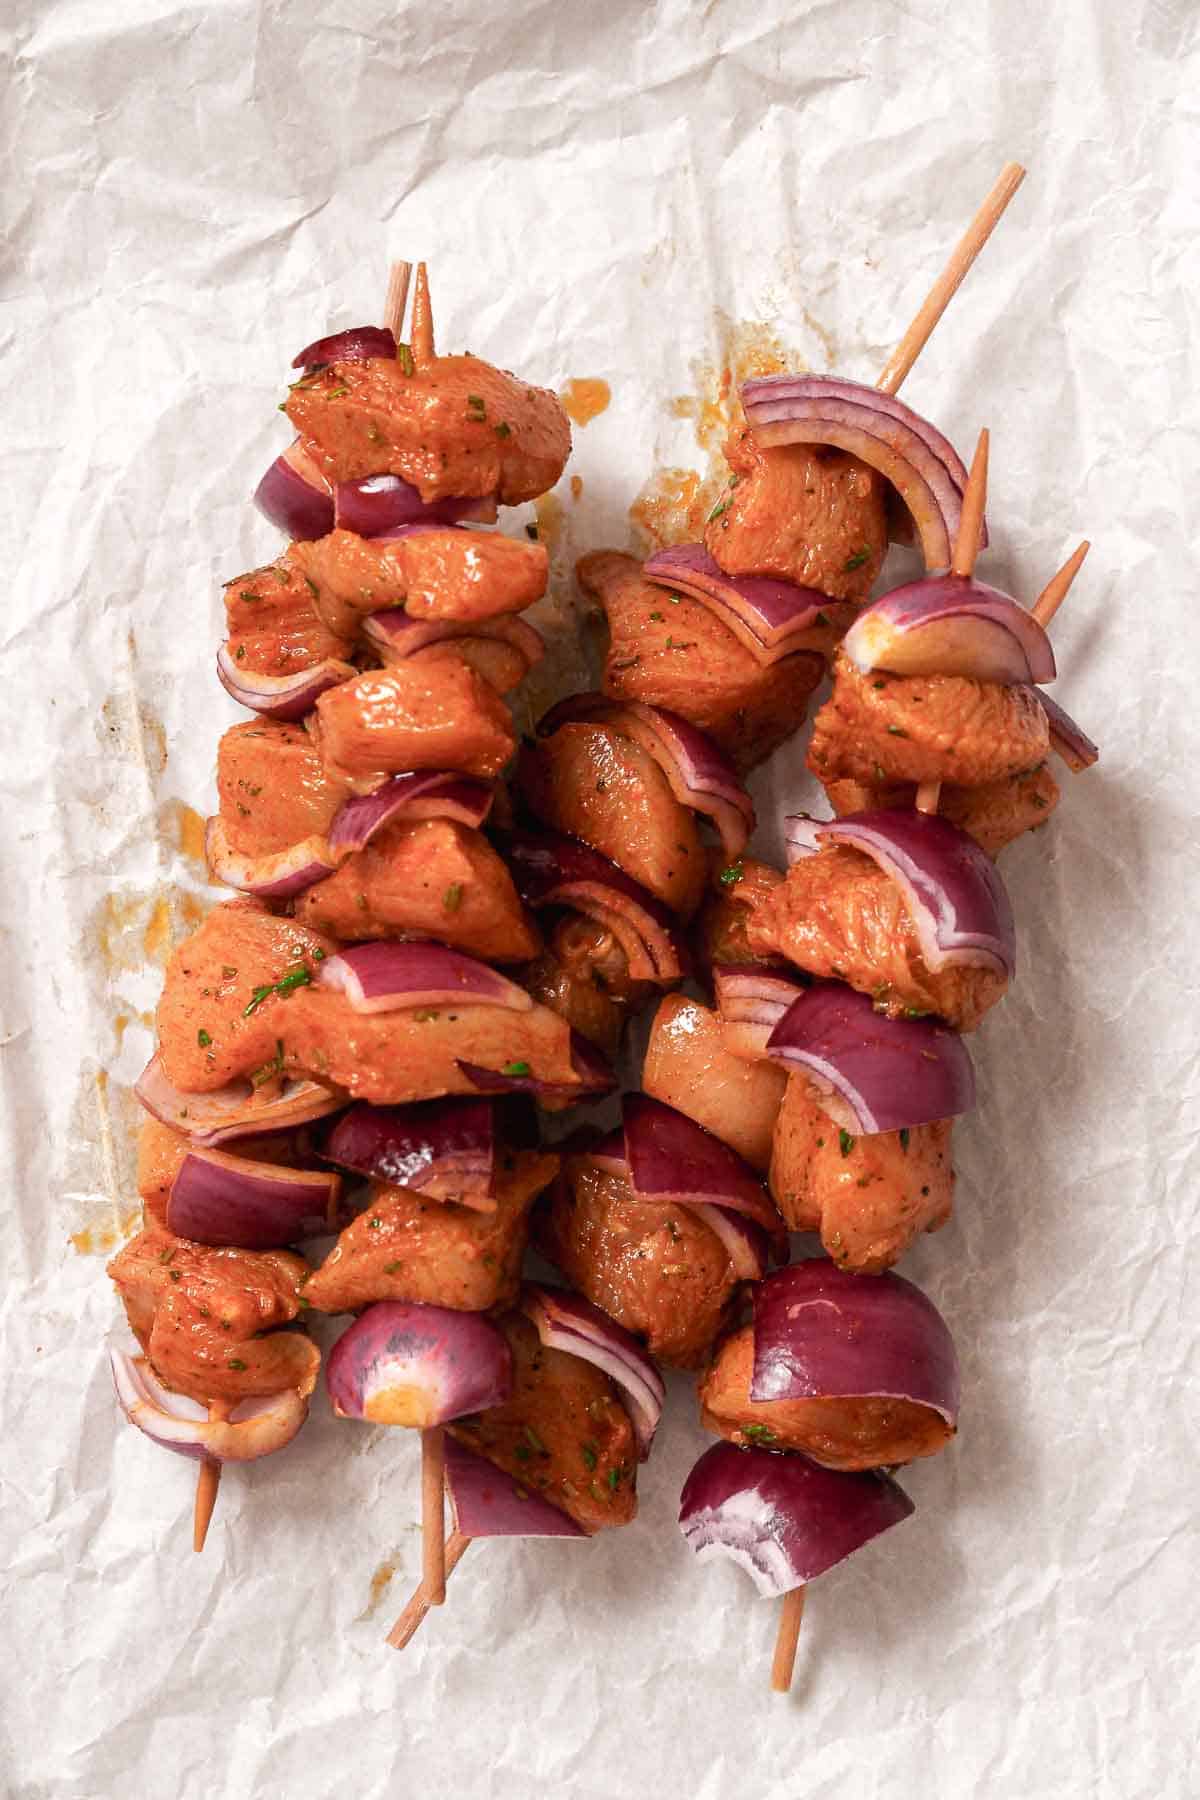 marinated chicken with red onion on wooden skewers.